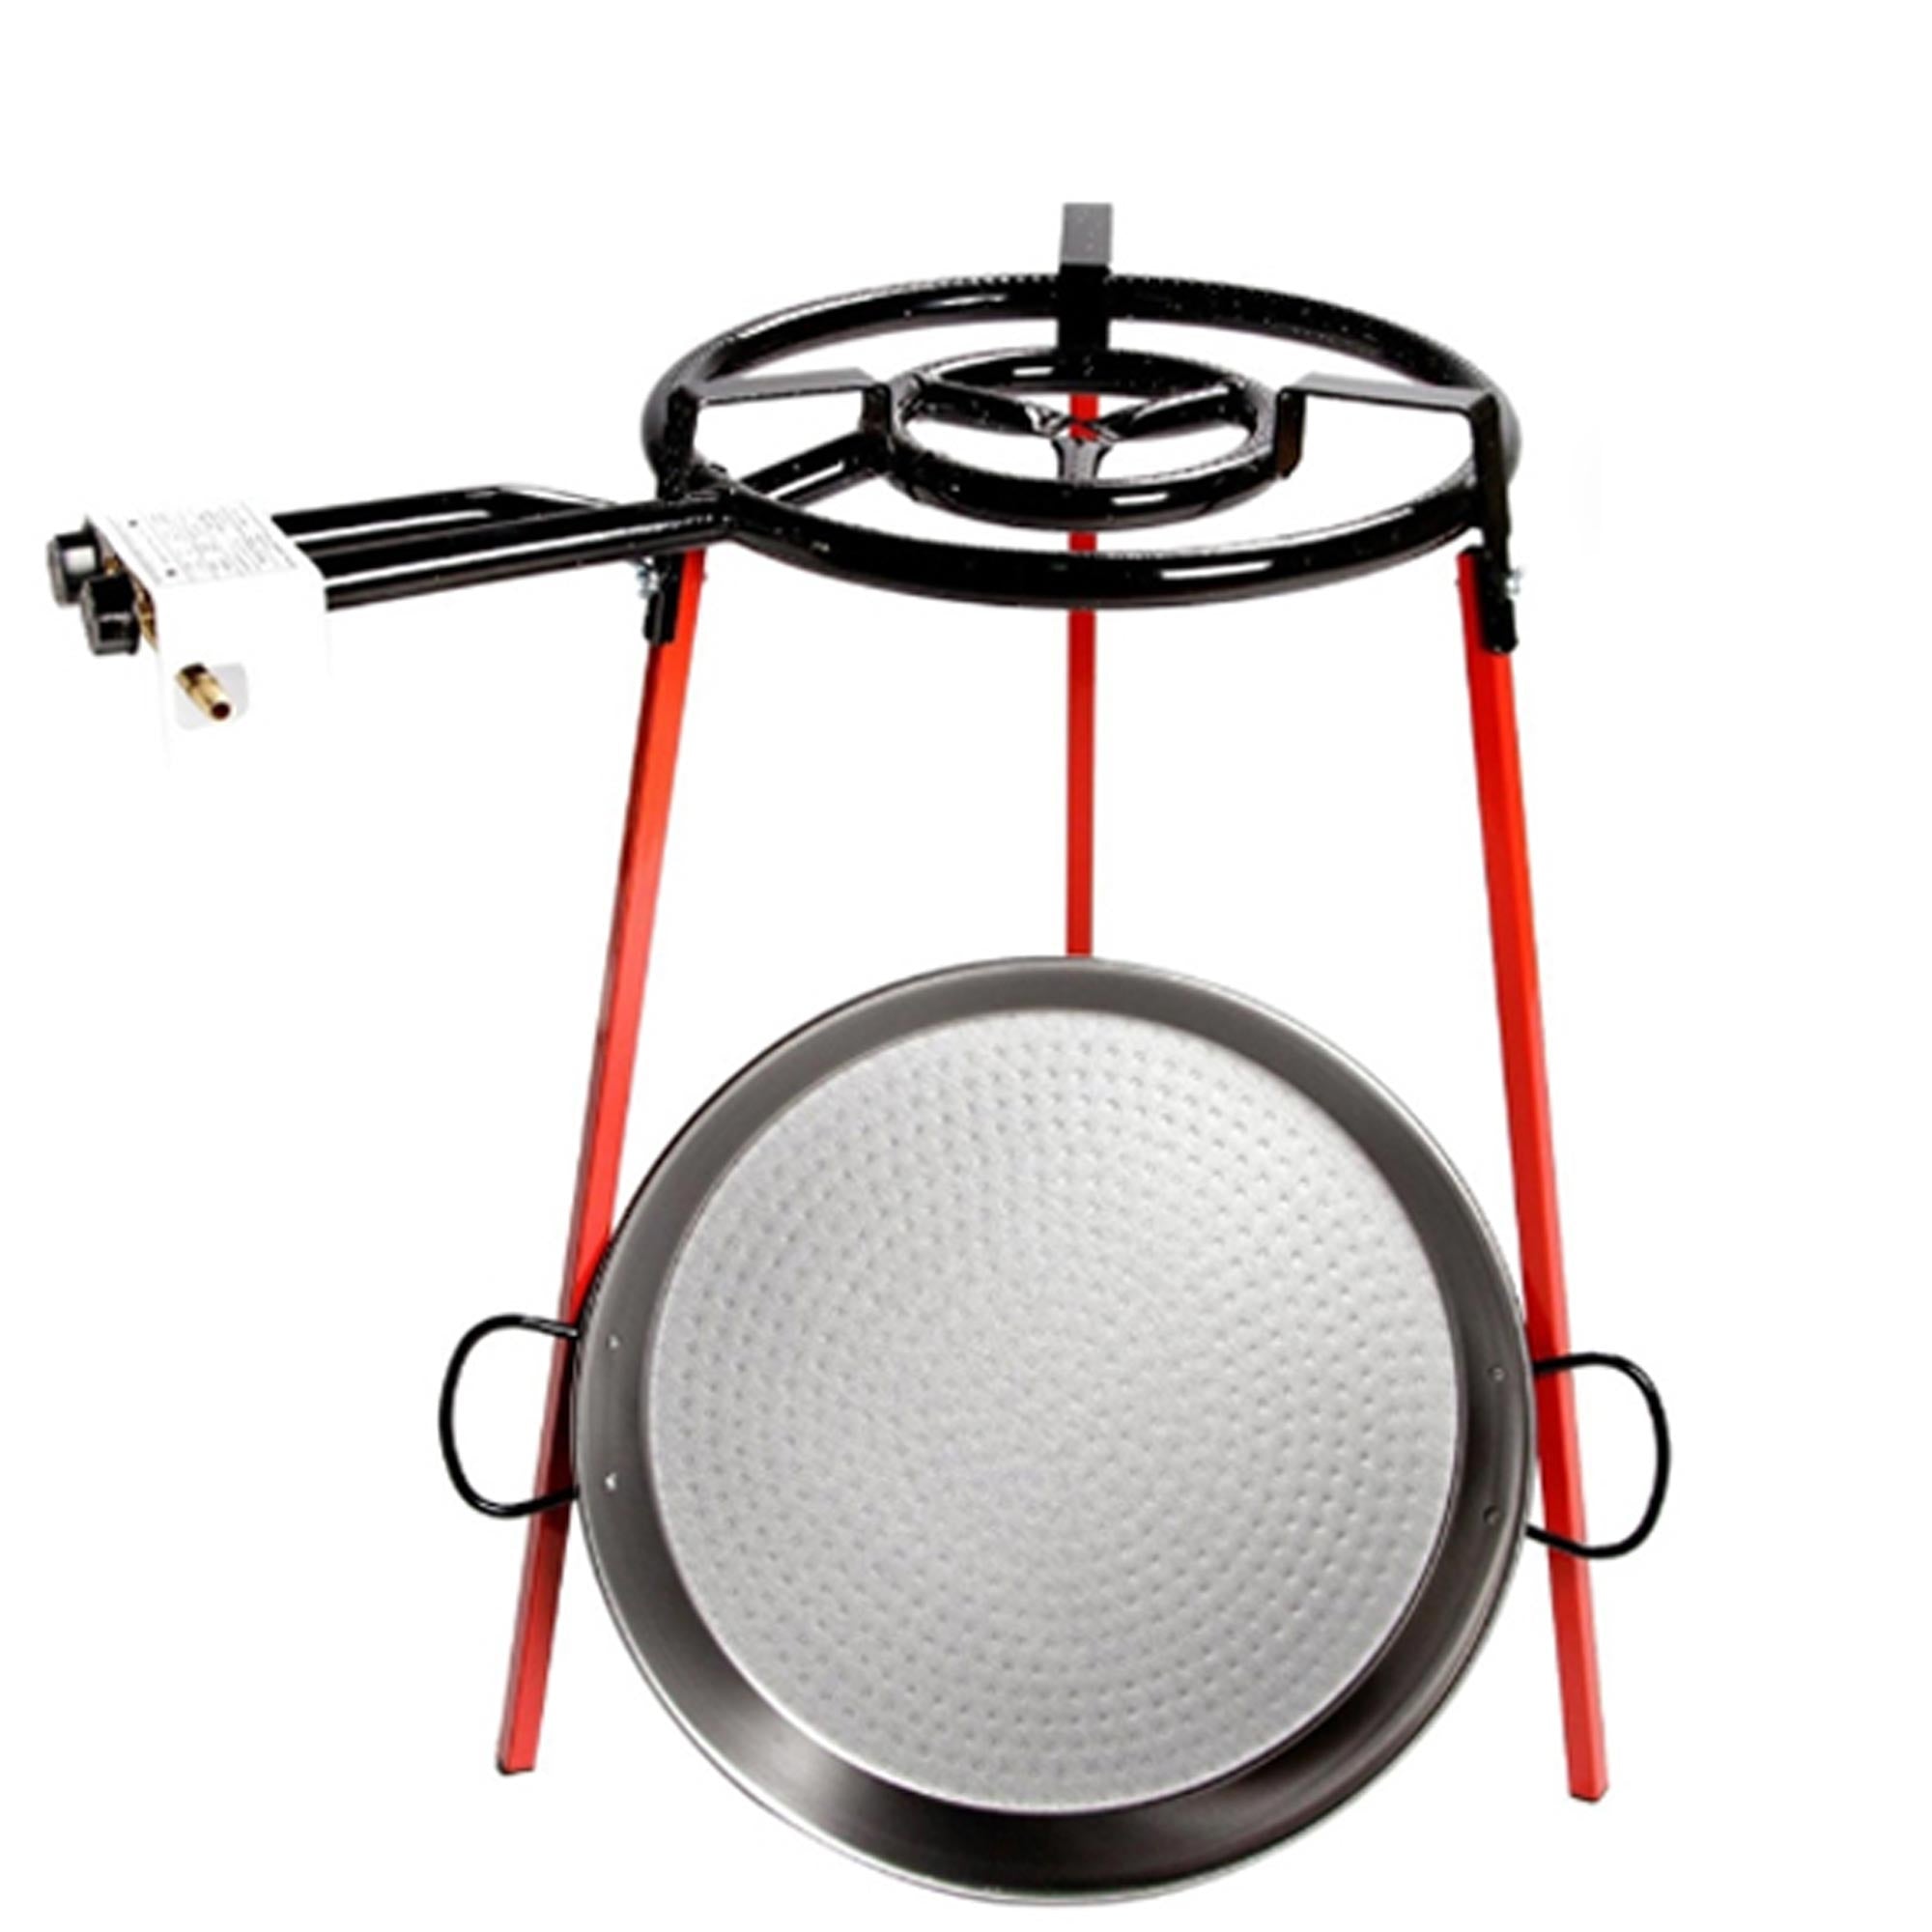 Castevia Imports Castevia Complete EcoSet Polished Steel Paella Pan 15-inch 38cm Up to 8 Servings + Paella GAS Burner